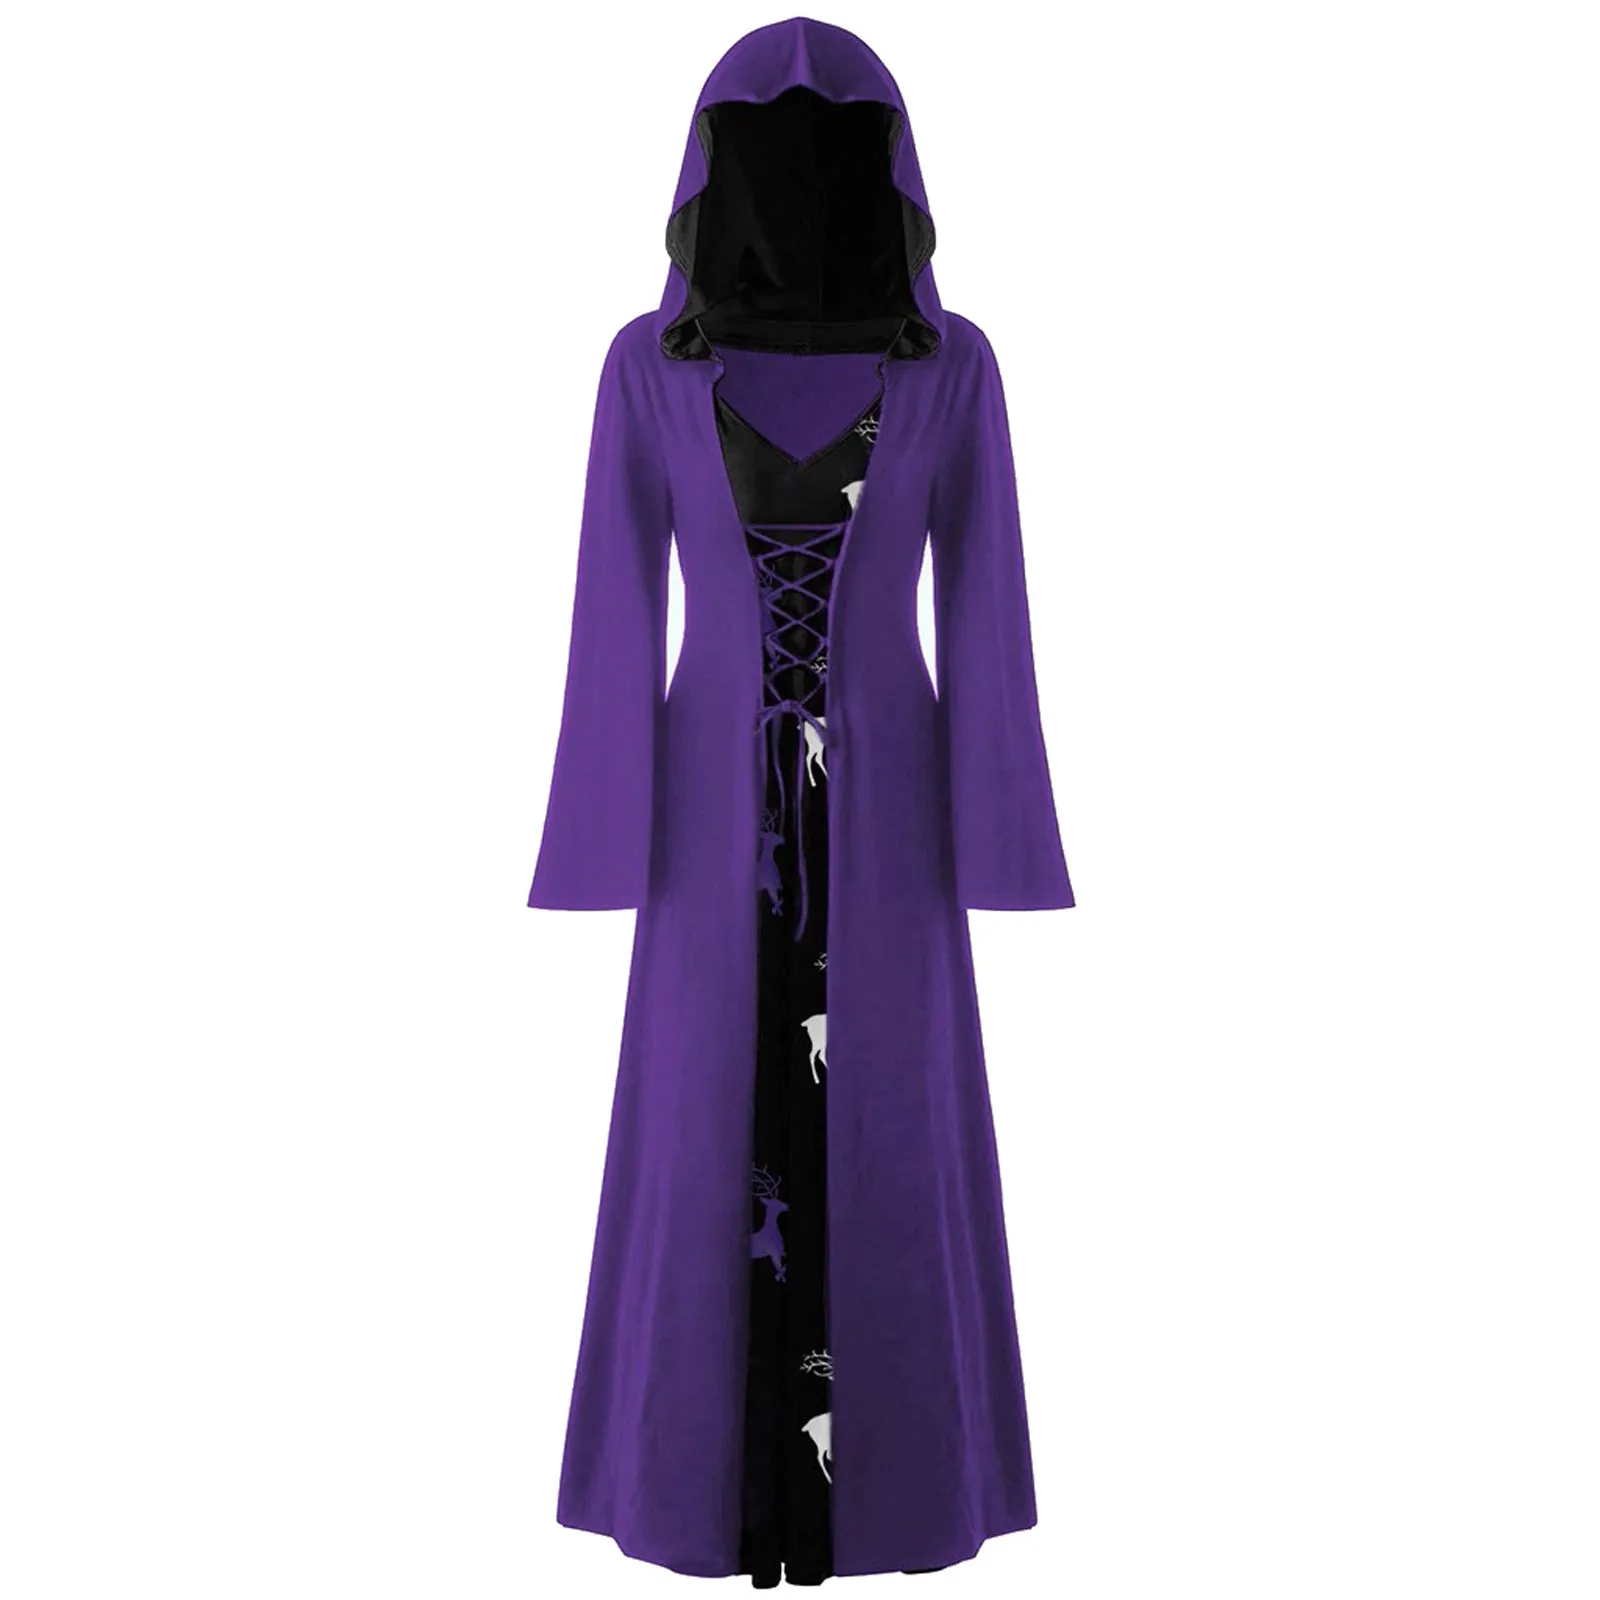 Women Medieval Renaissance Gothic Halloween Robe Long Sleeve Hooded Witch Cloak Long Dress Cosplay Party Costume Vintage Dresses